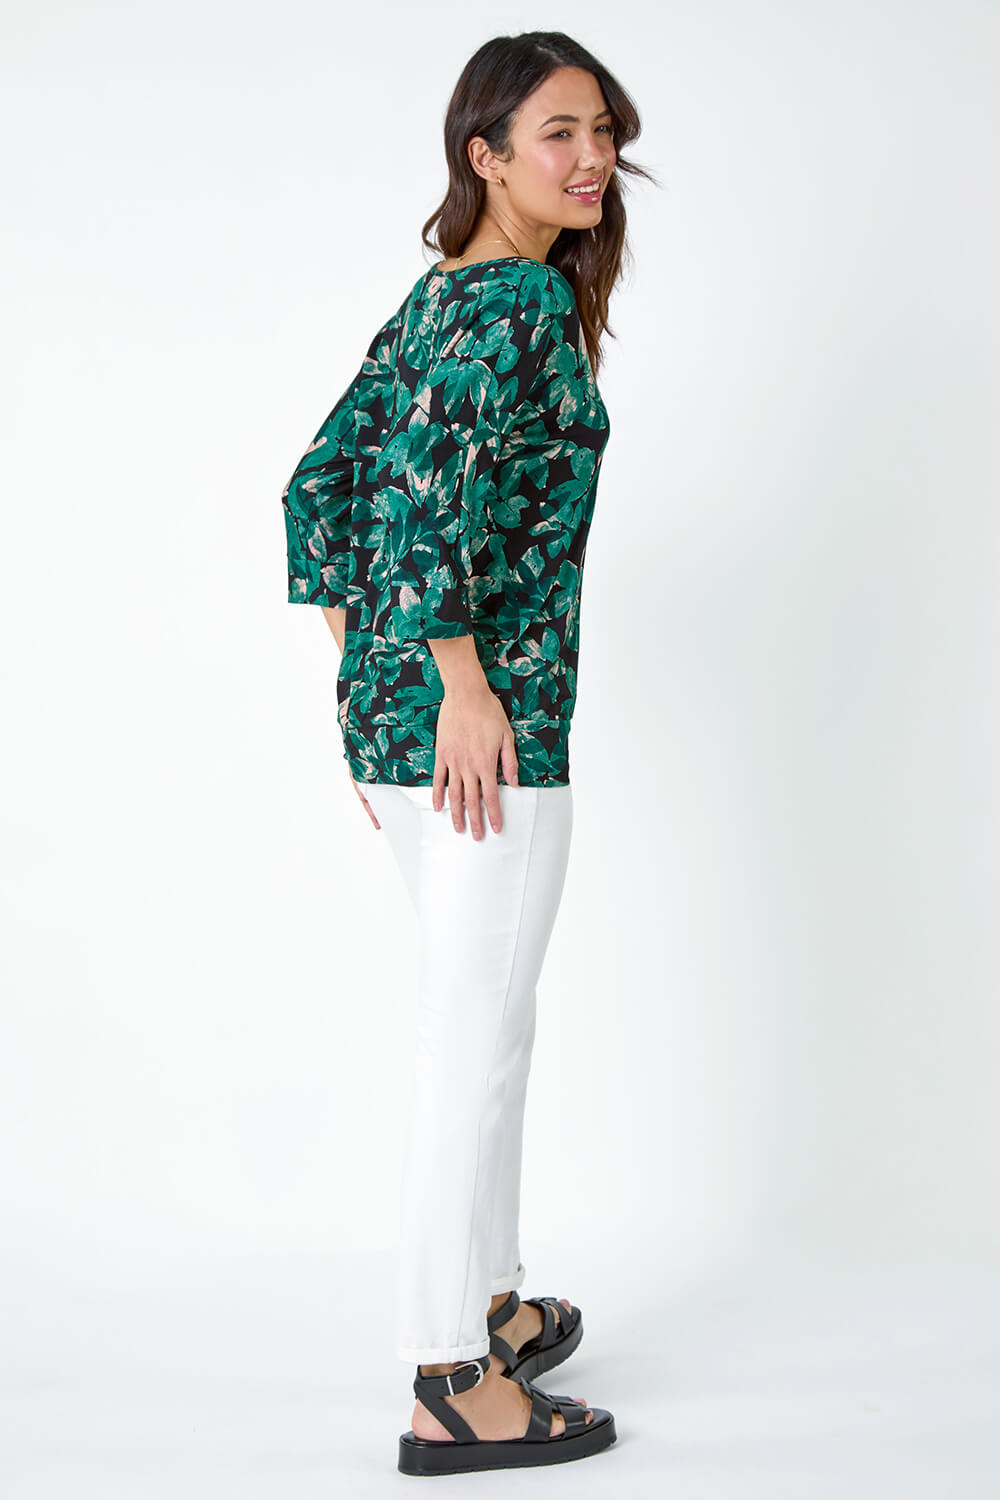 Green Floral Print Blouson Stretch Top, Image 3 of 5